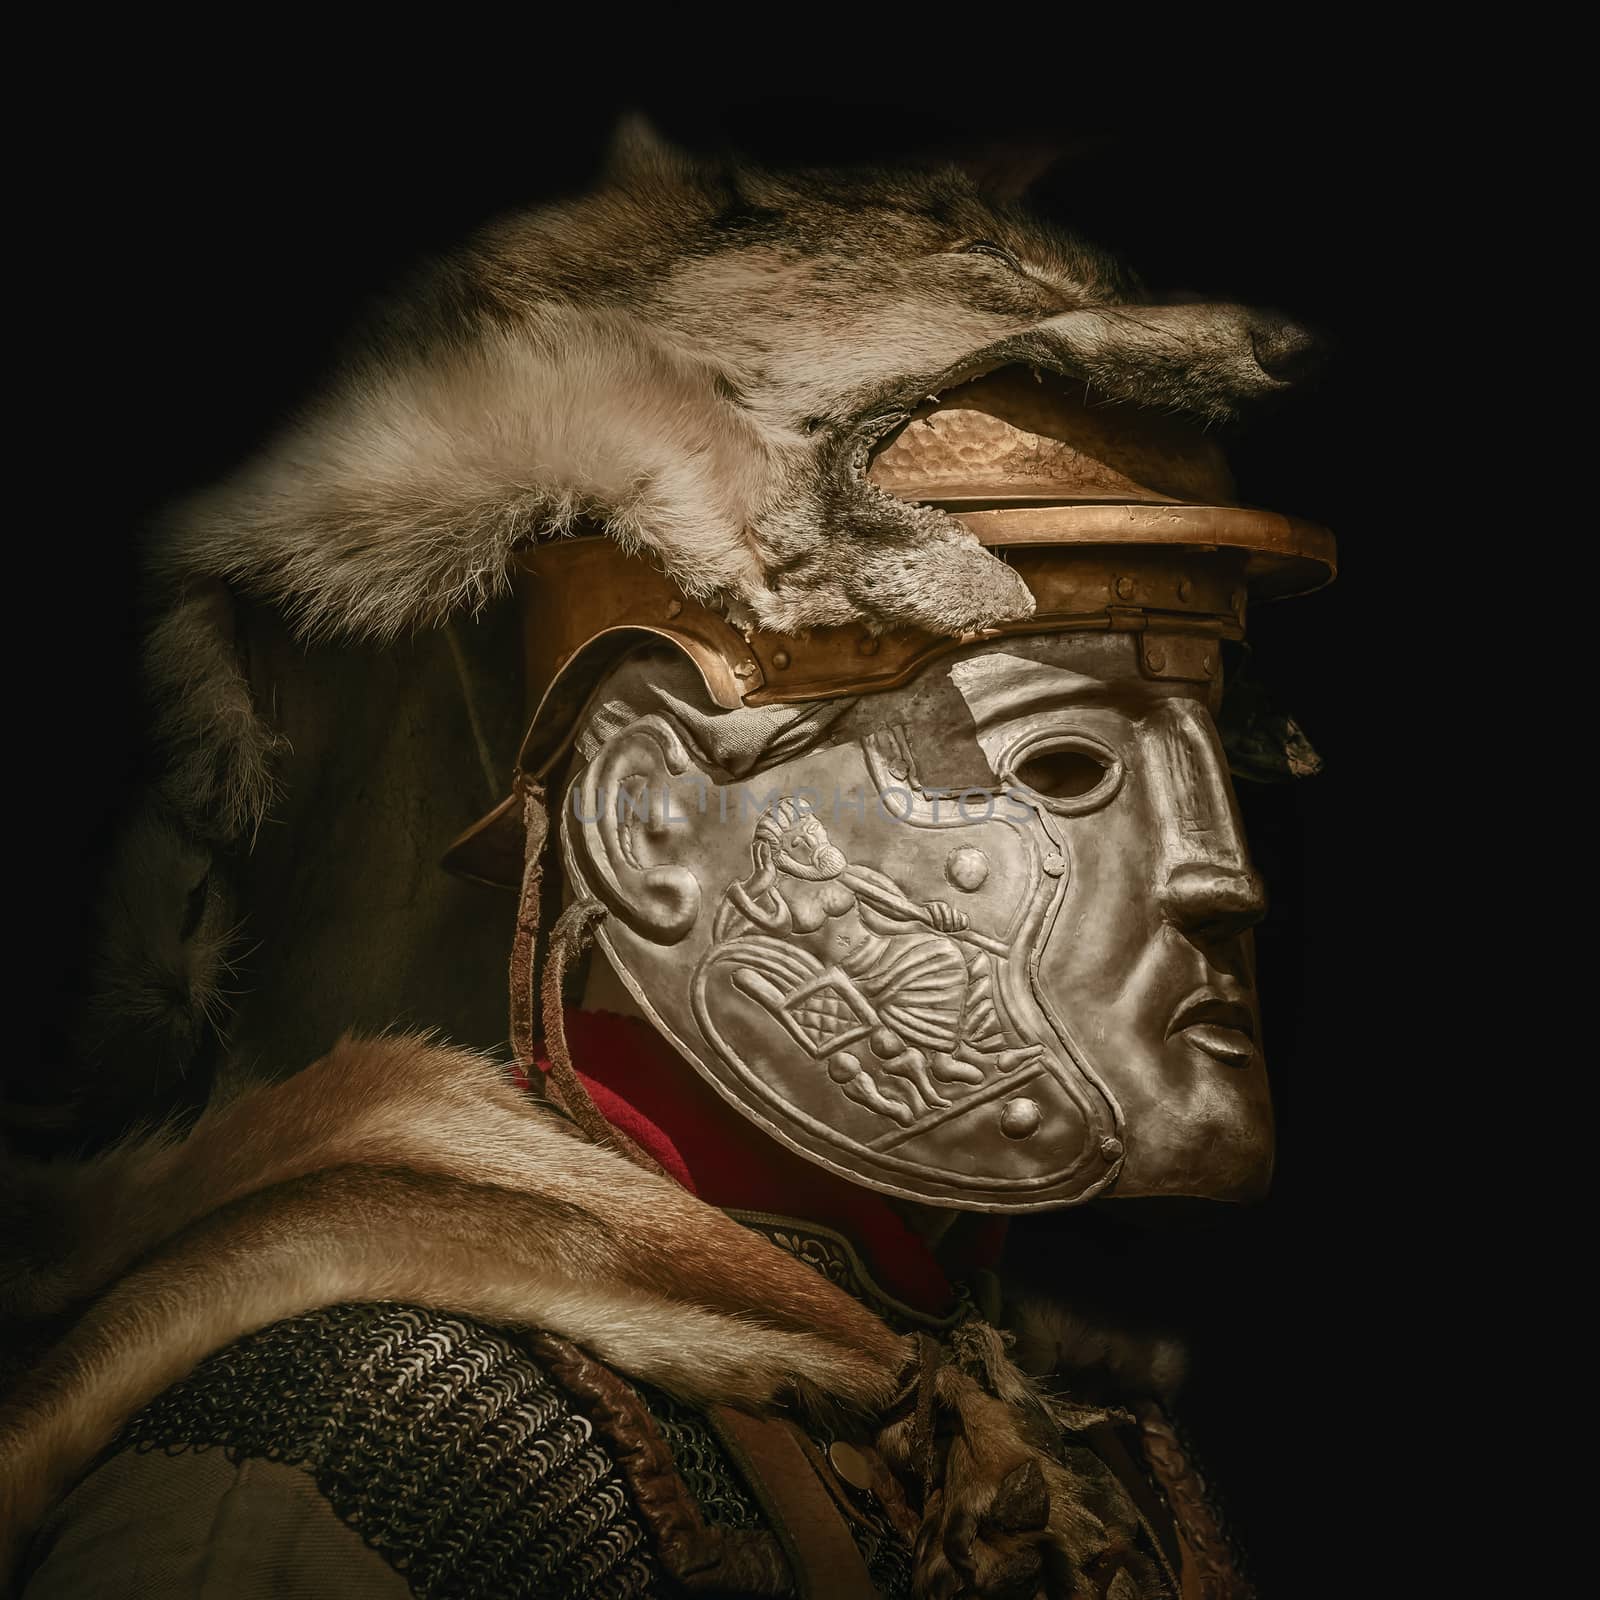 Portrait of Legionary in Mask by SNR